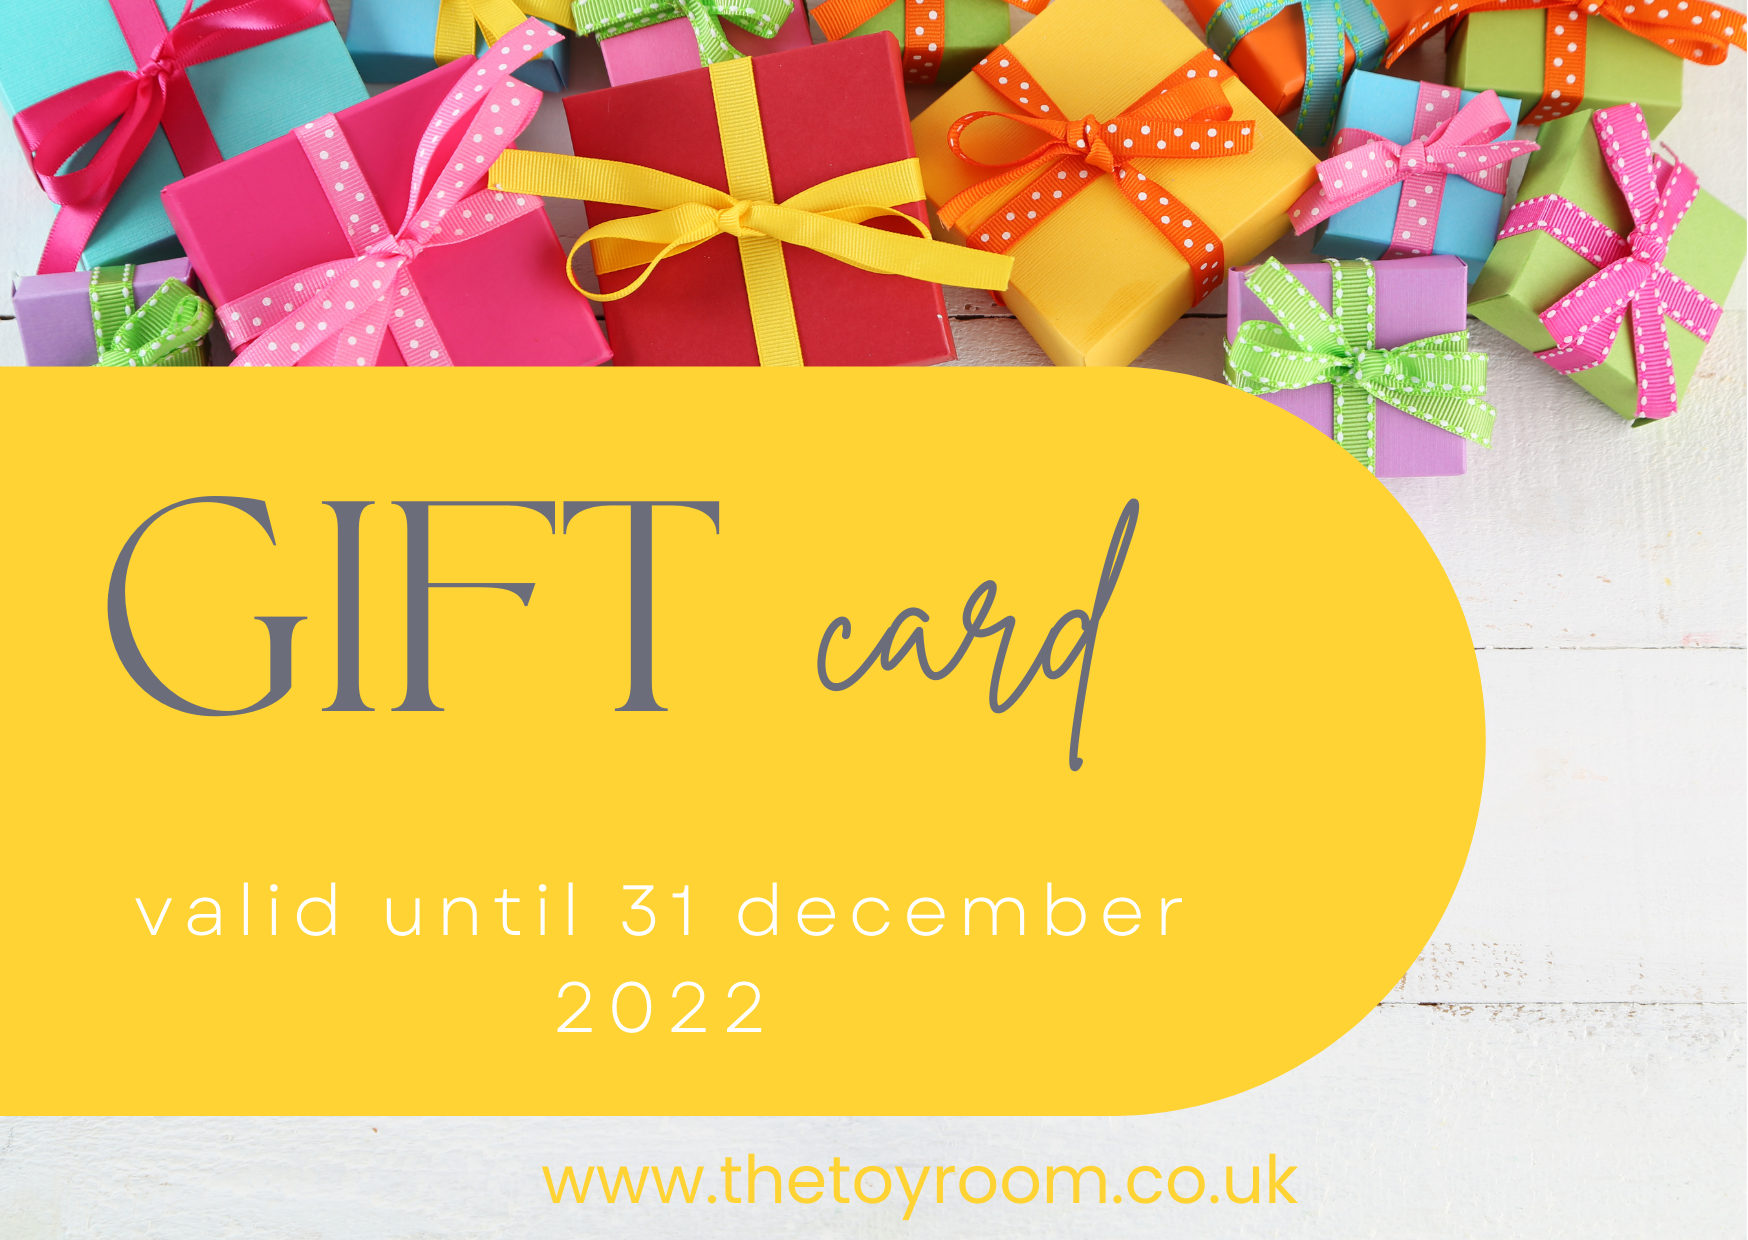 E-gift cards for your lived one's - The Toy Room